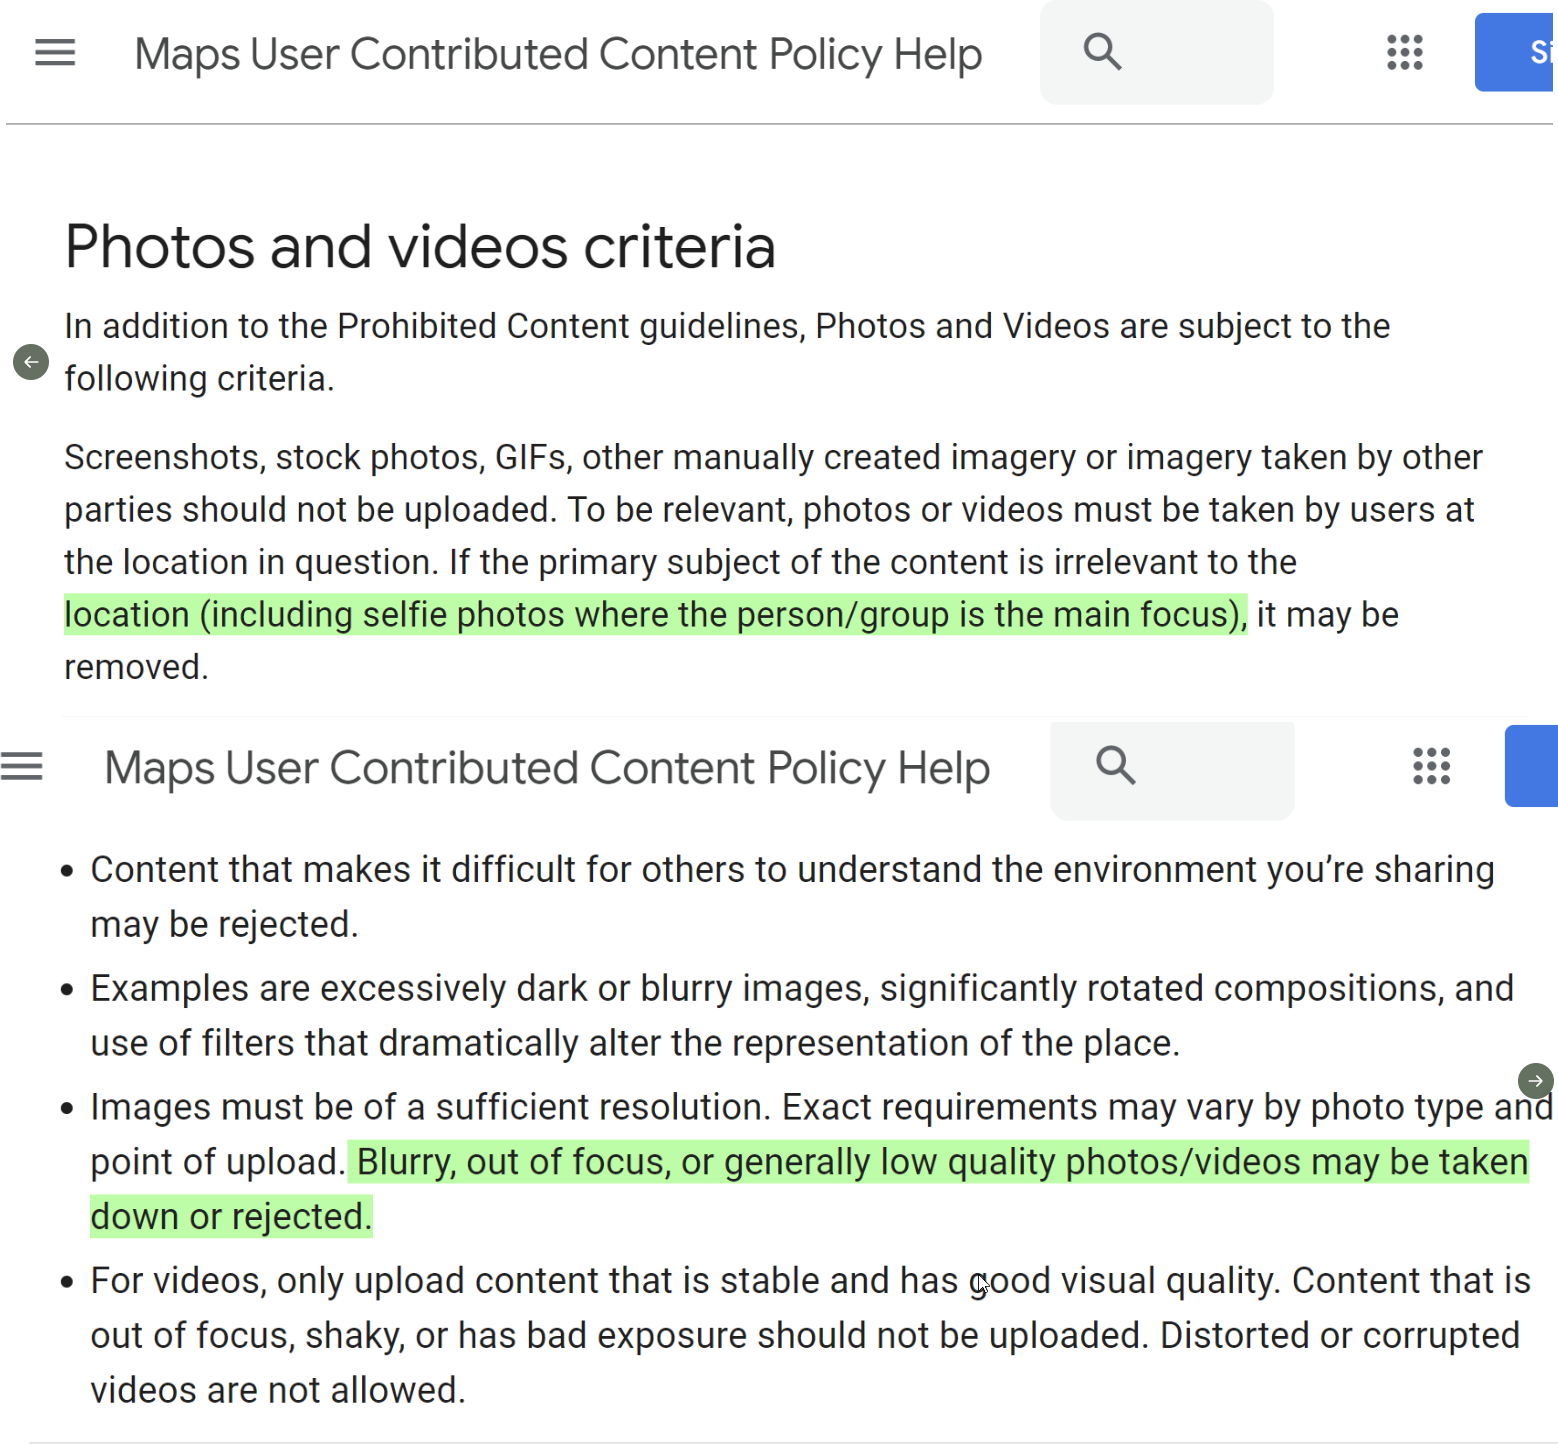 Google Maps Updated Their Help Center To Advise Users Not To Upload Selfies Or Photos That Are Blurry